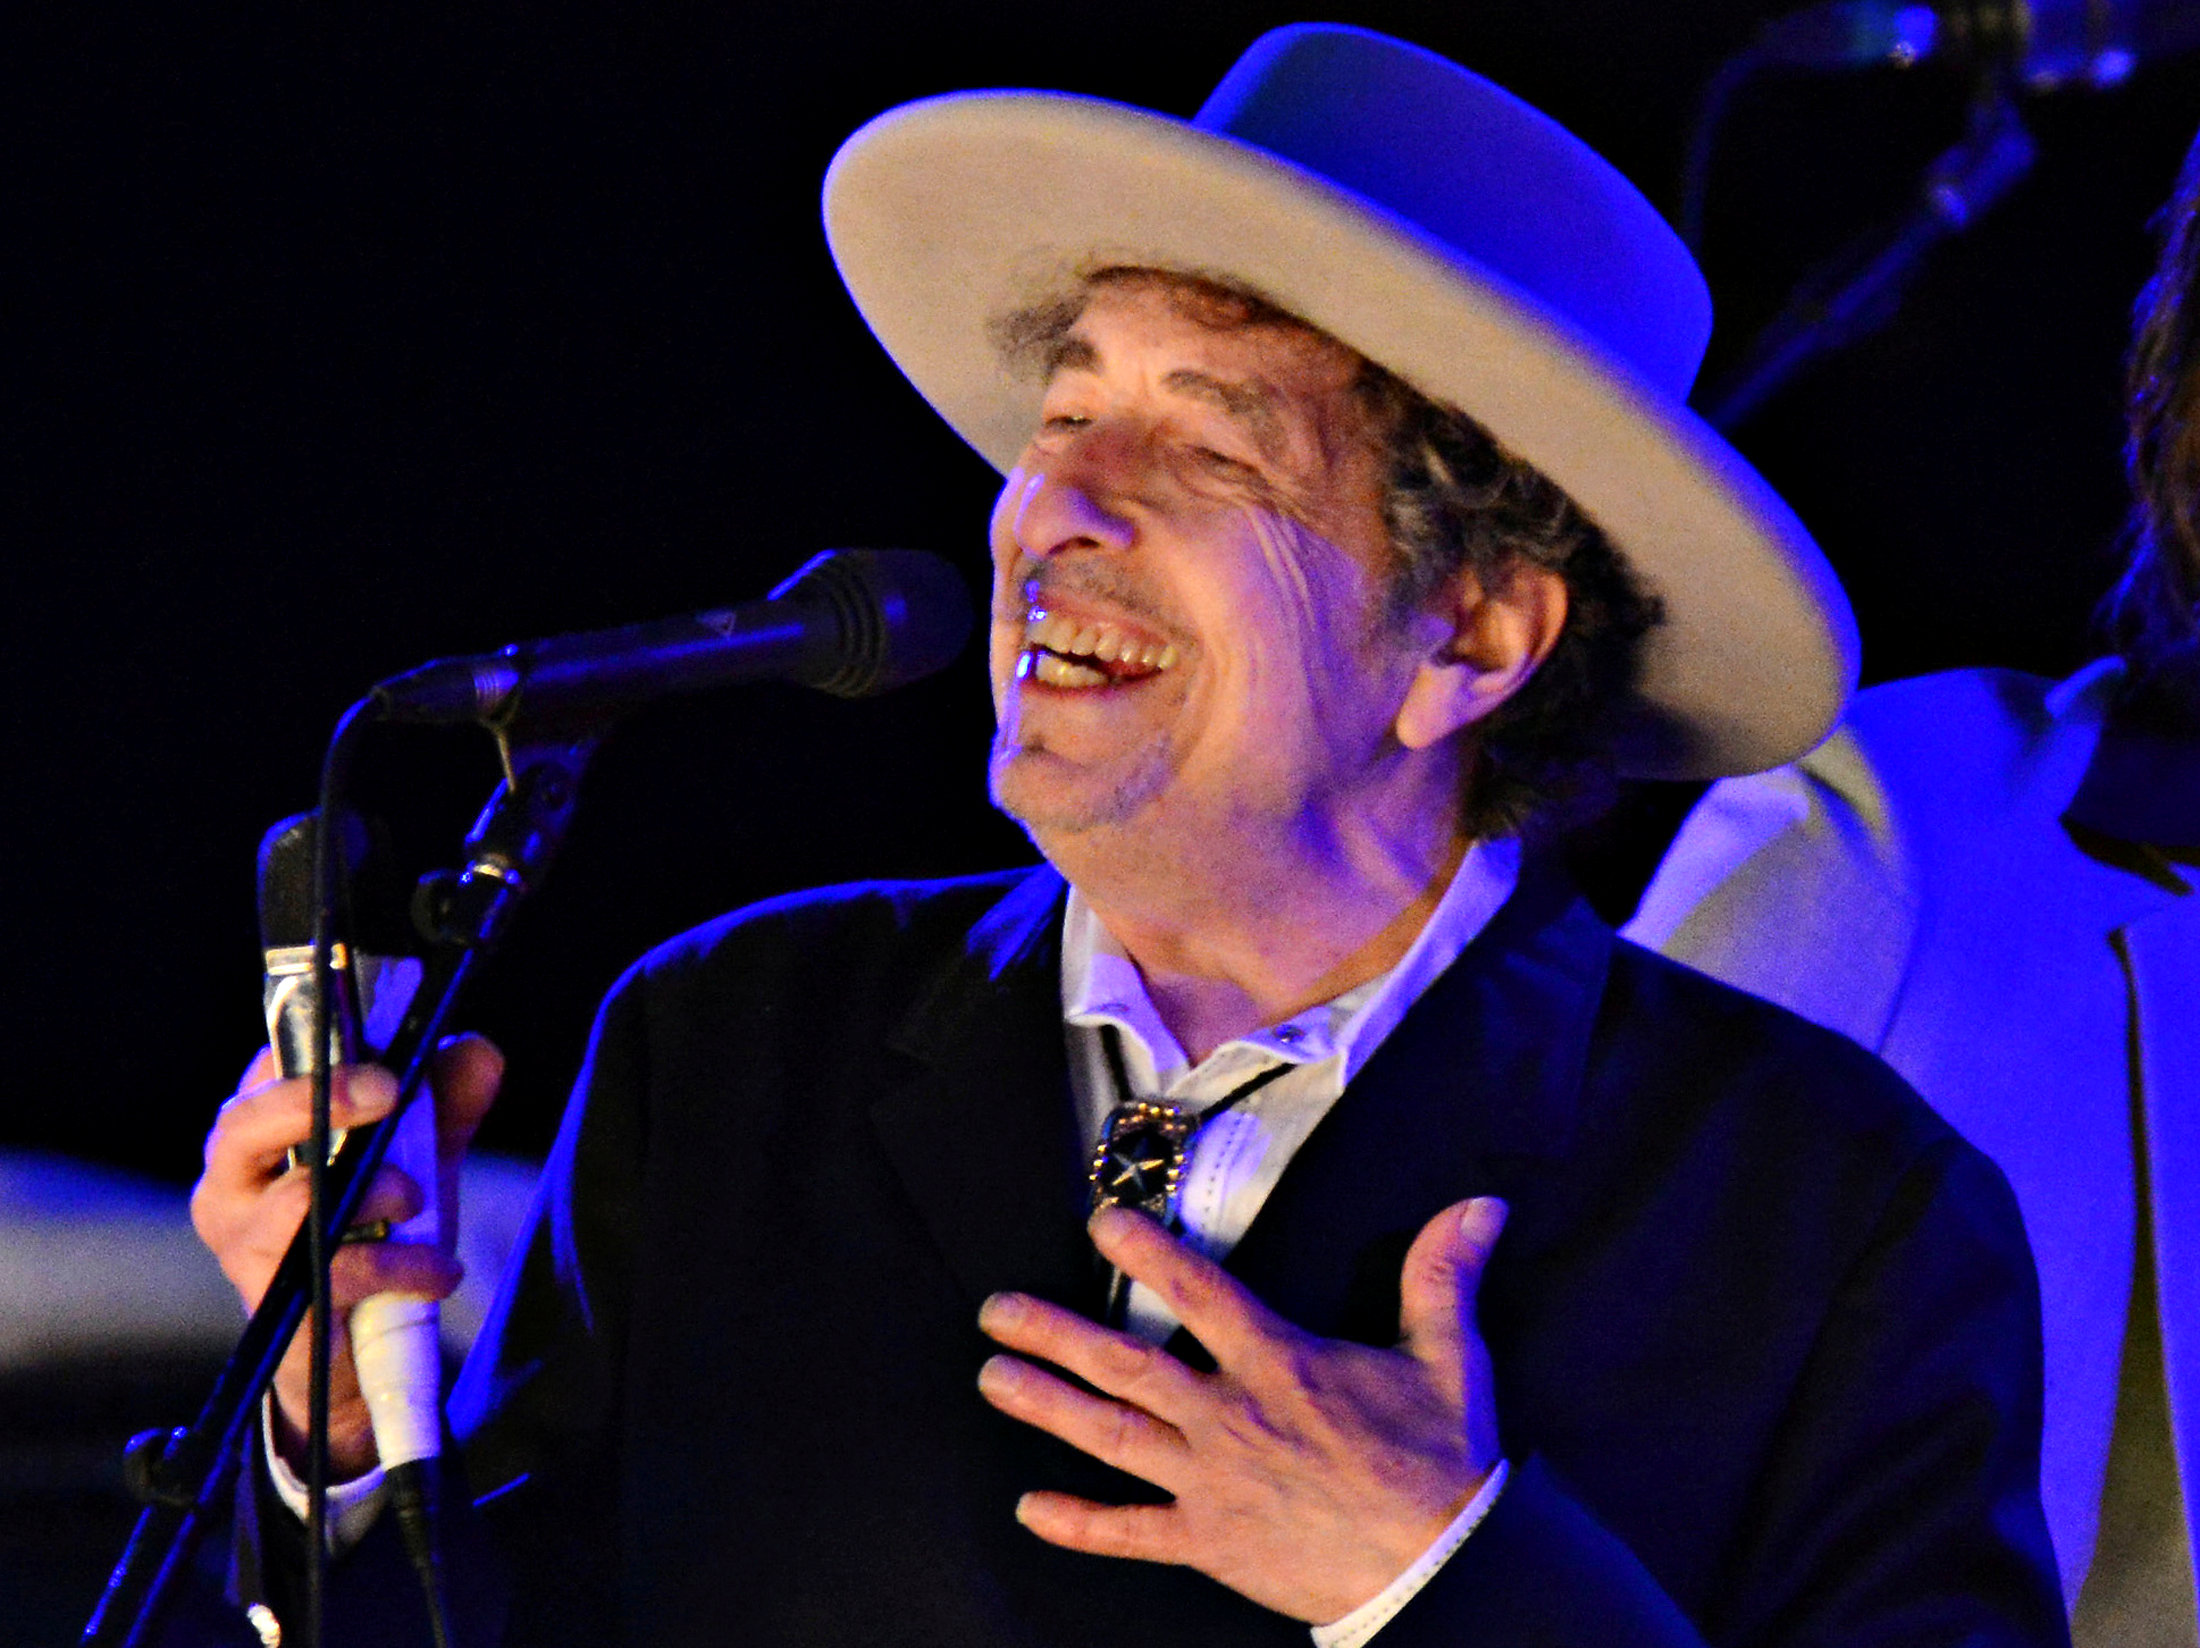 U.S. musician Bob Dylan performs during on day 2 of The Hop Festival in Paddock Wood, Kent on June 30th 2012. REUTERS/Ki Price/Files